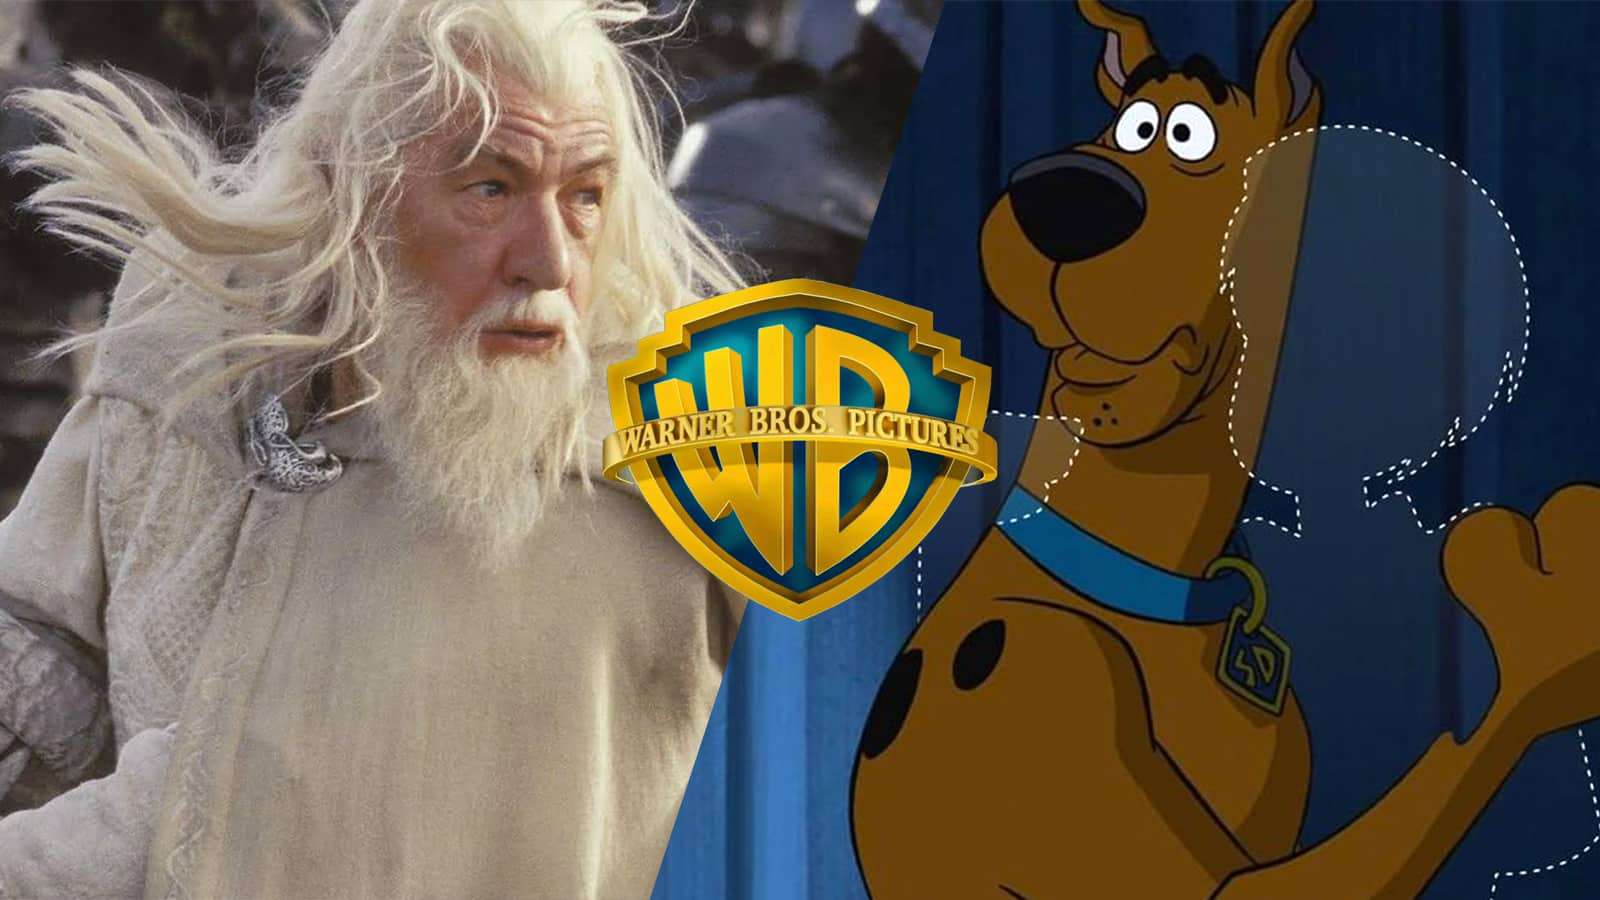 Gandalf and Scooby Doo appearing in Warner Bros fighting game Multiversus